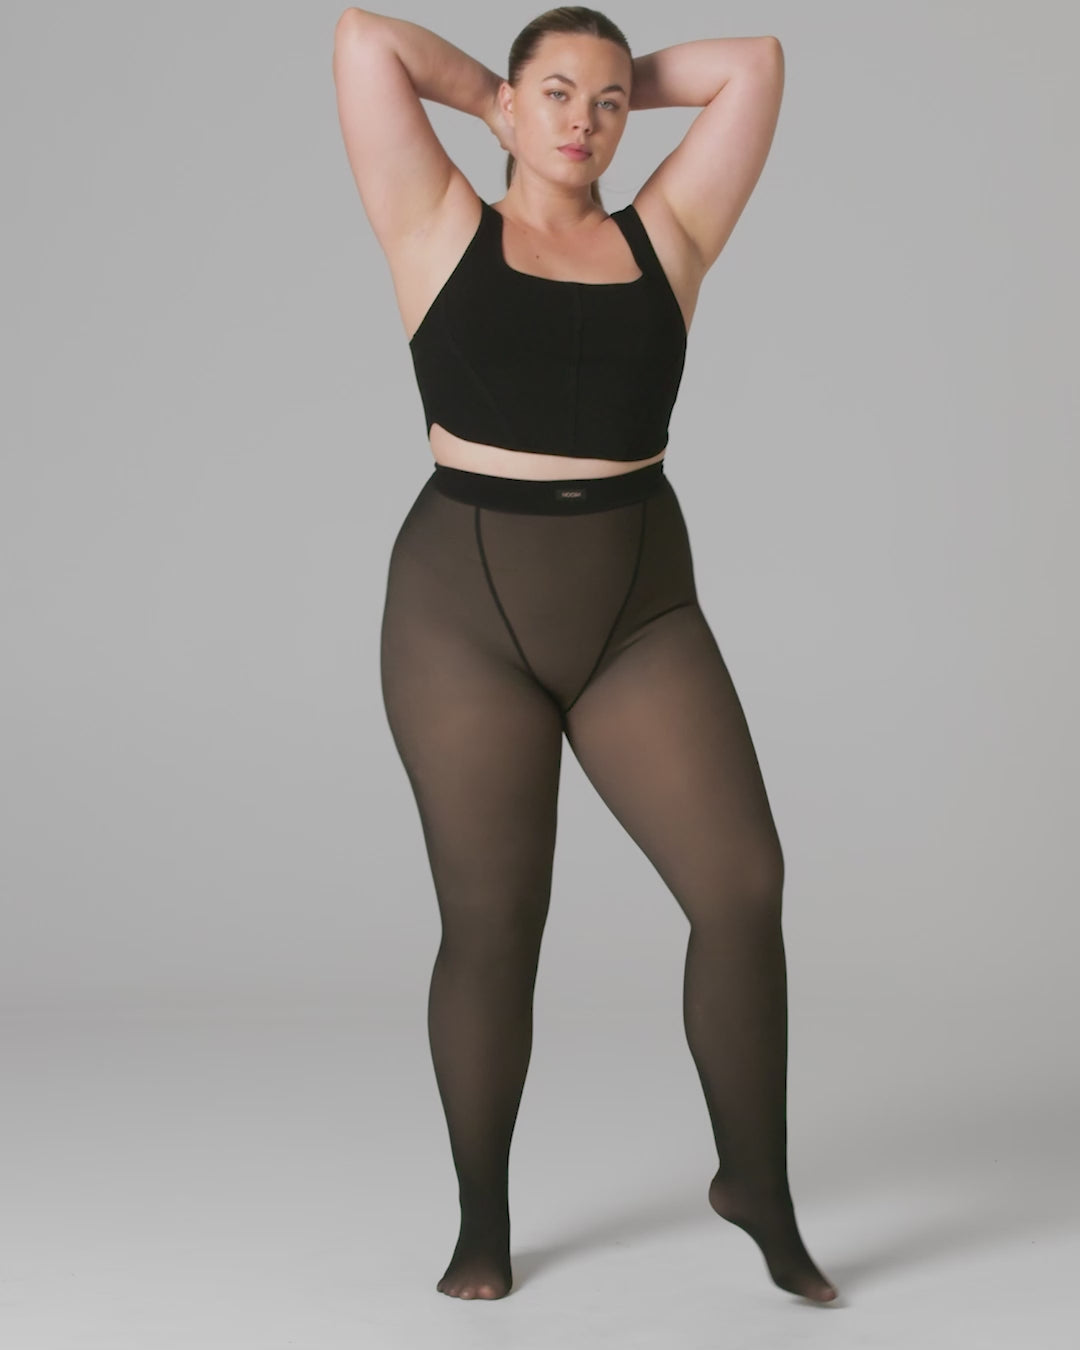 French Toast Ankle Length Legging